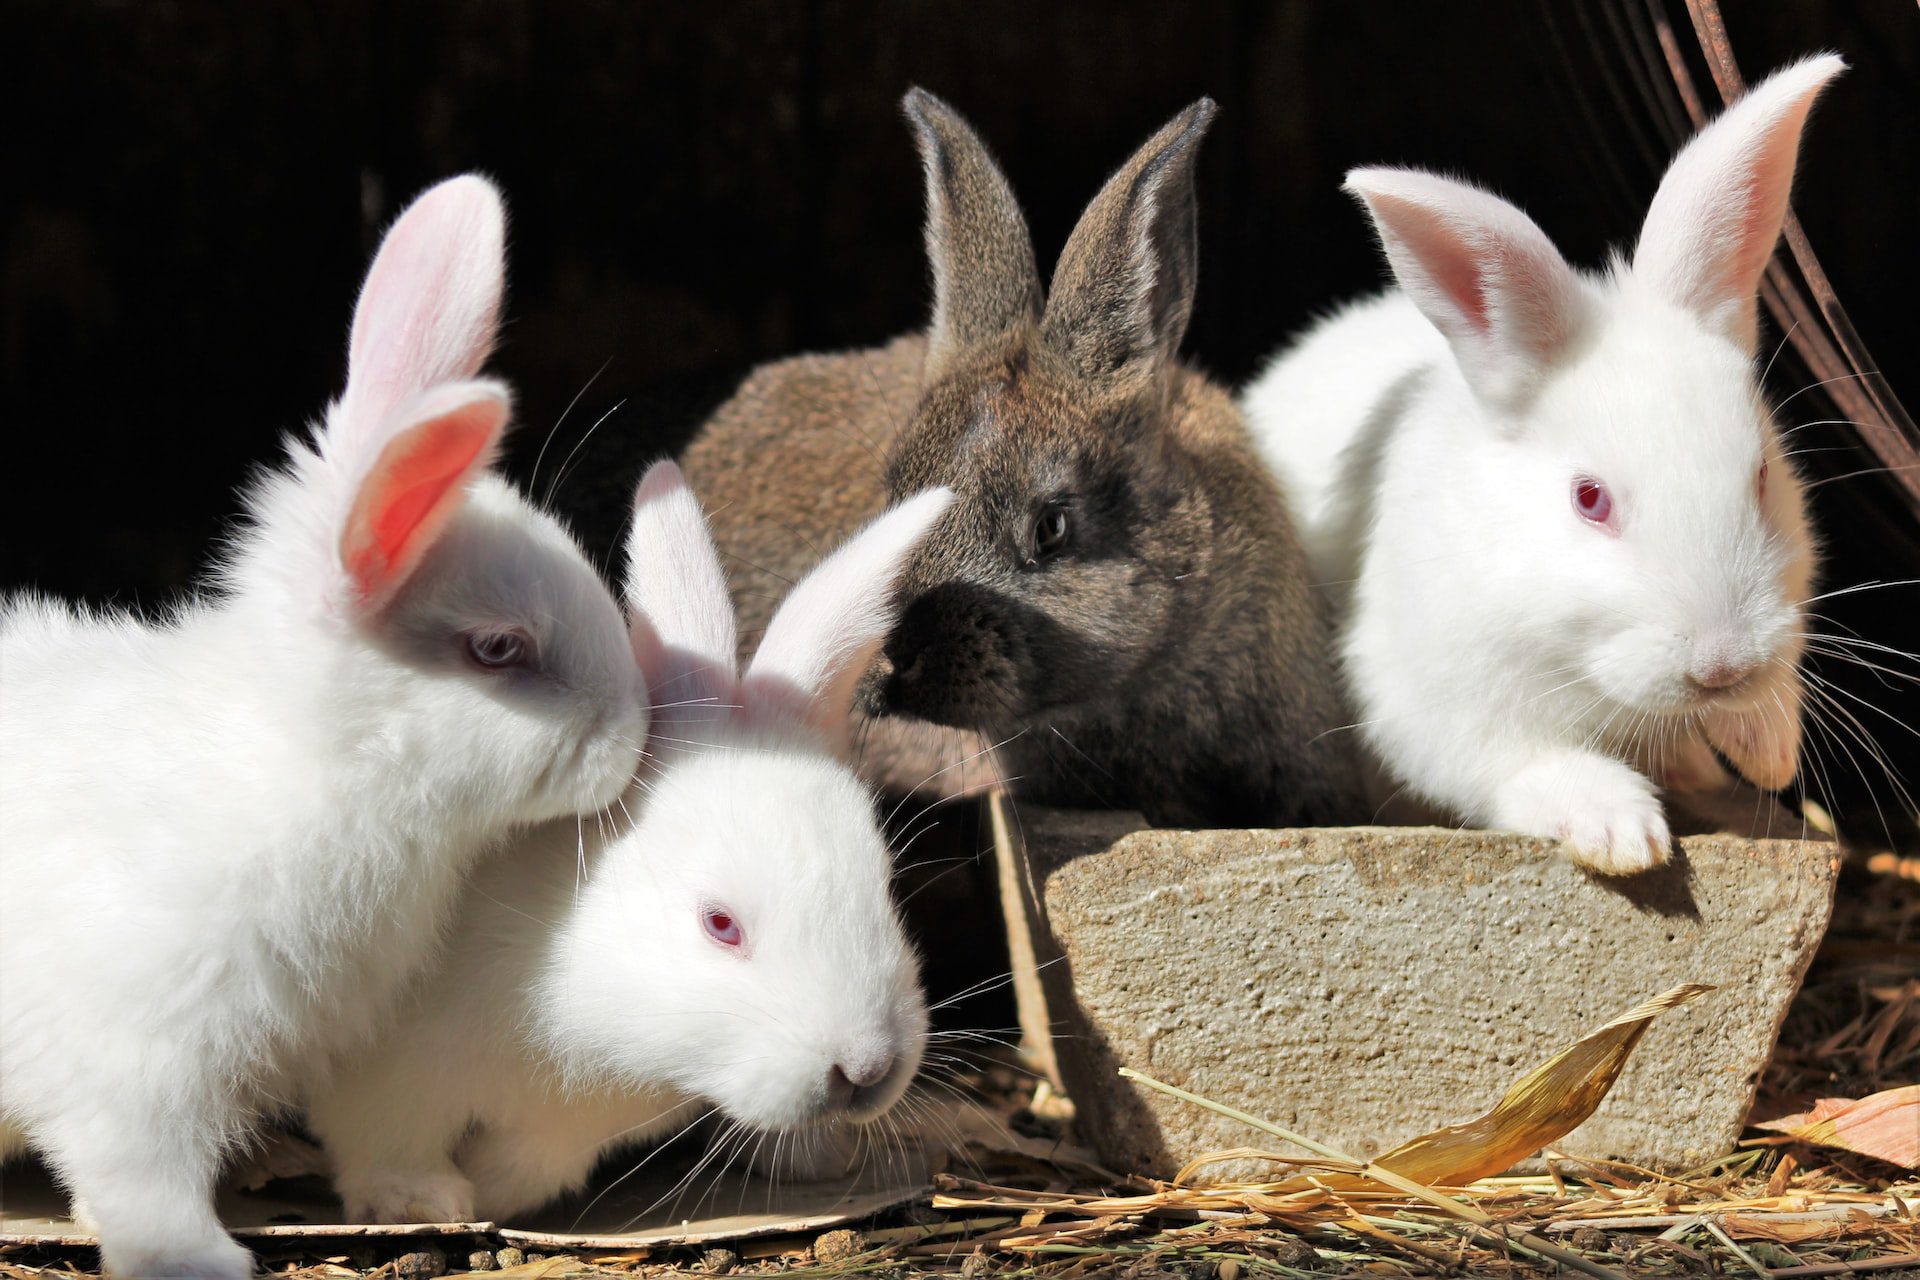 Various pet rabbits hanging out together